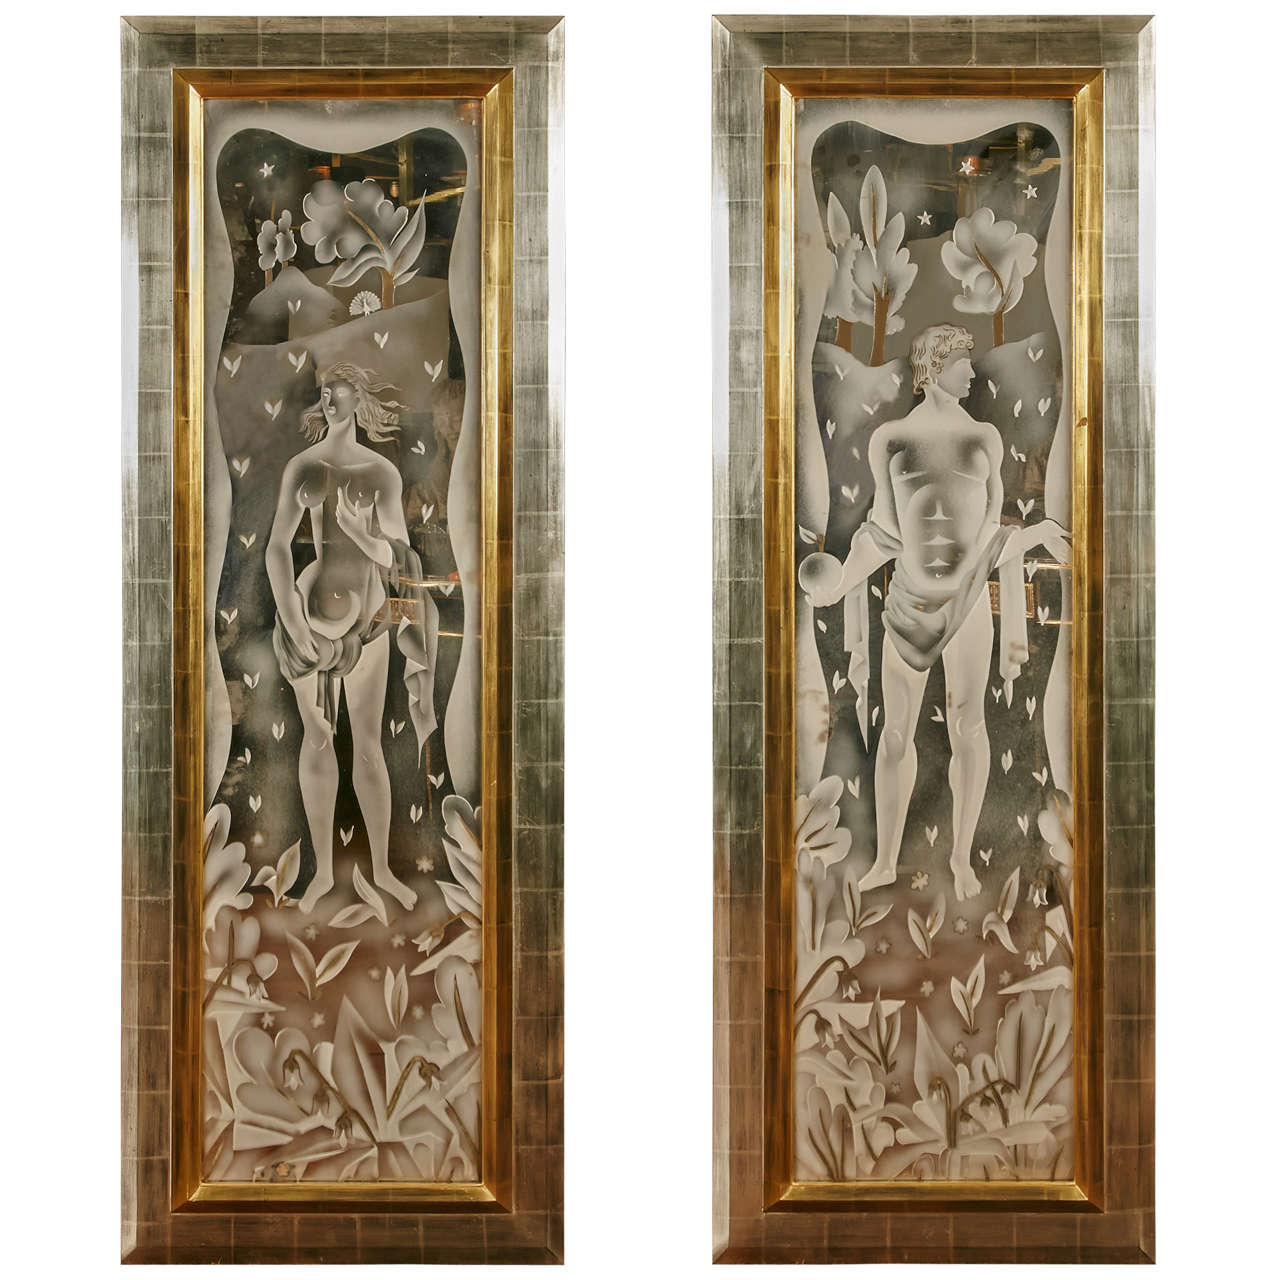 Amazing Pair of Engraved Mirrors "Adam and Eve"